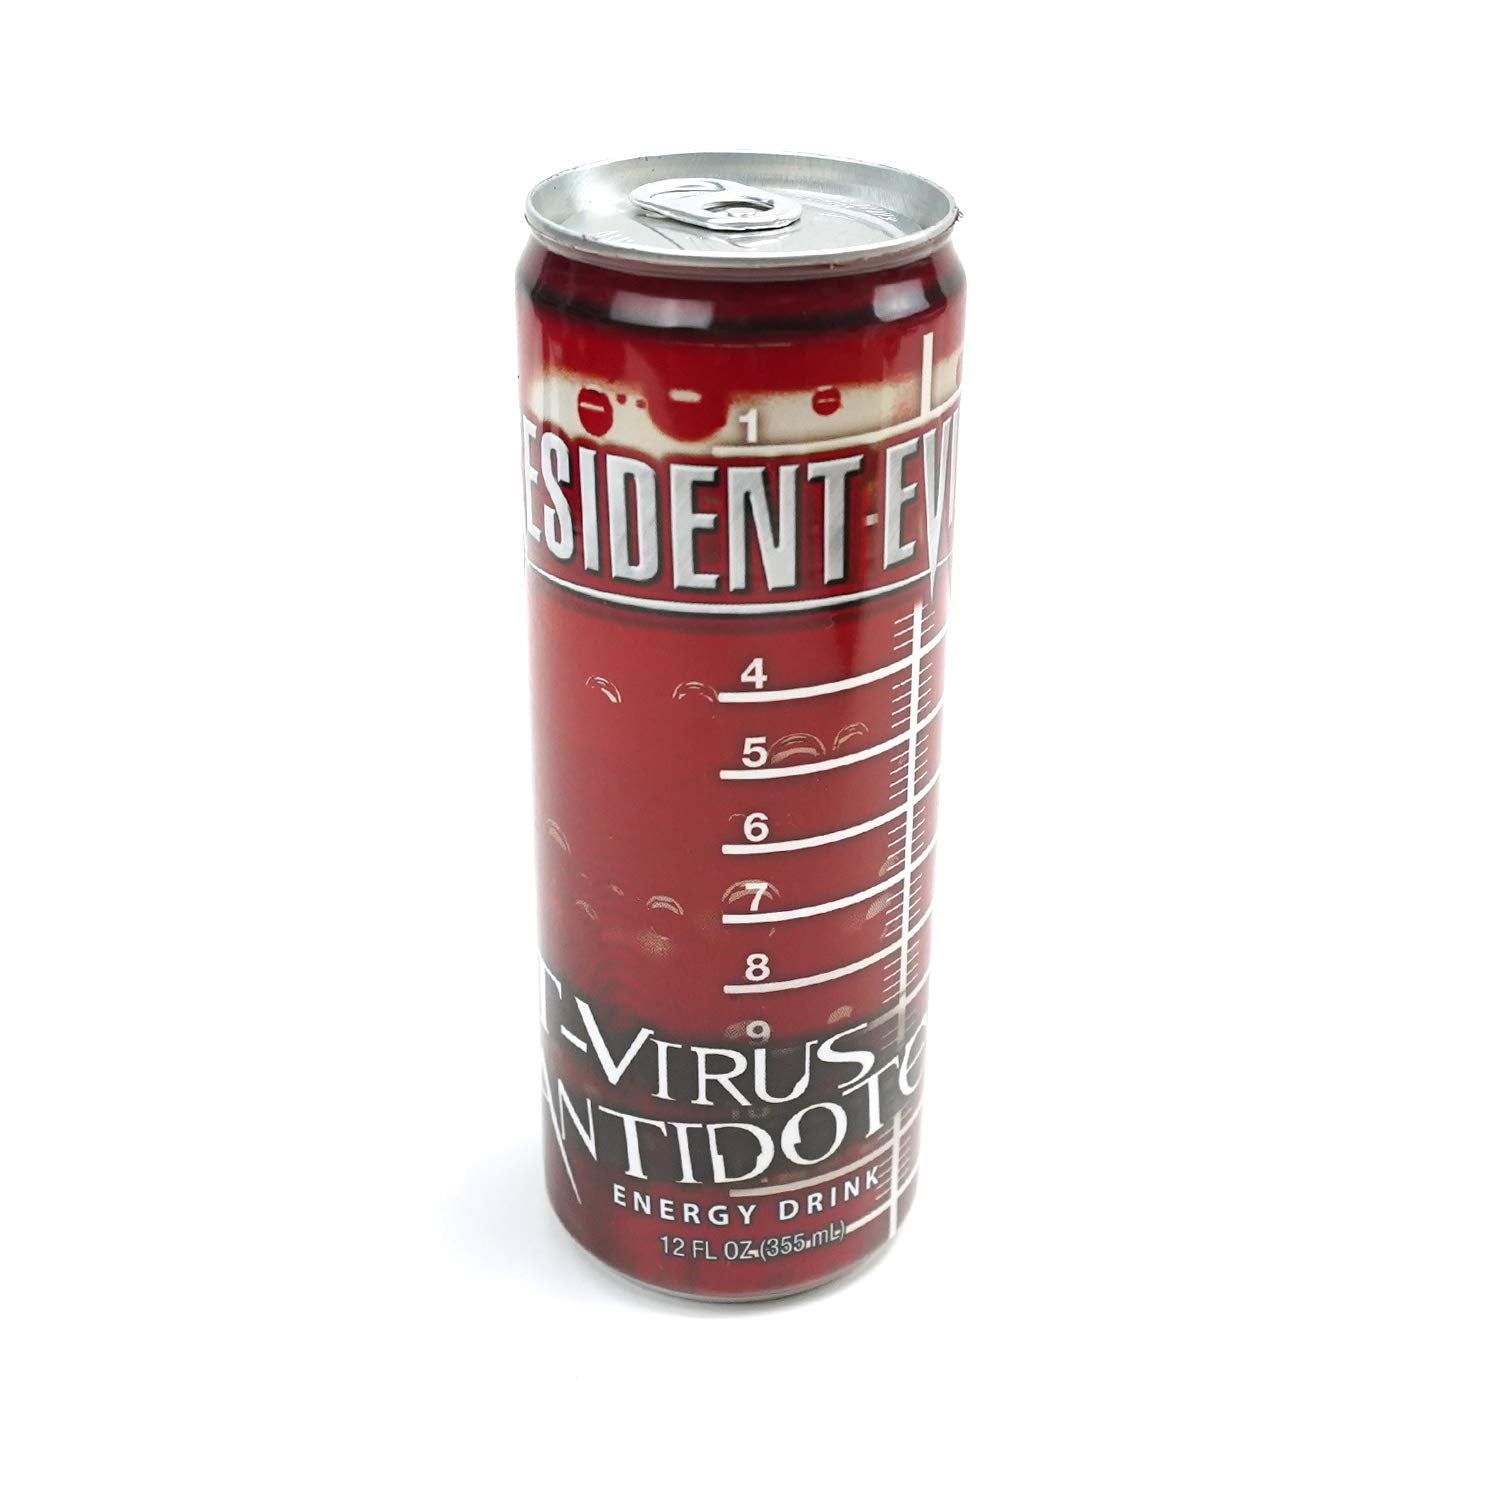 Resident Evil T Virus Antidote Energy Drink 12 FL OZ (355mL) (2 Pack) Can With 2 GosuToys Stickers